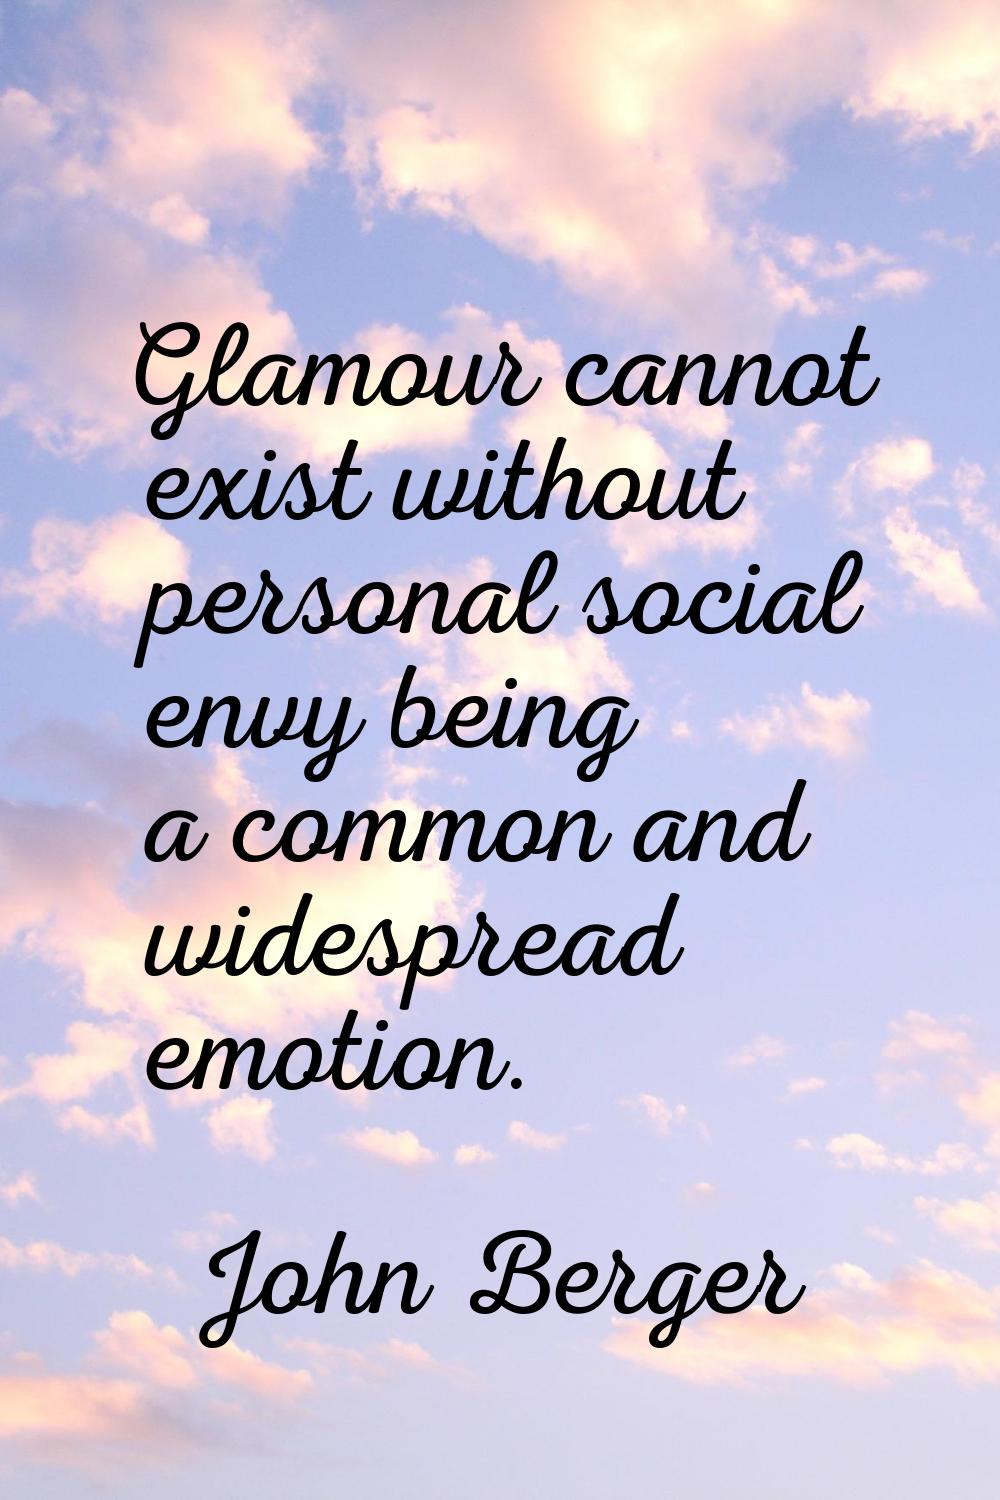 Glamour cannot exist without personal social envy being a common and widespread emotion.